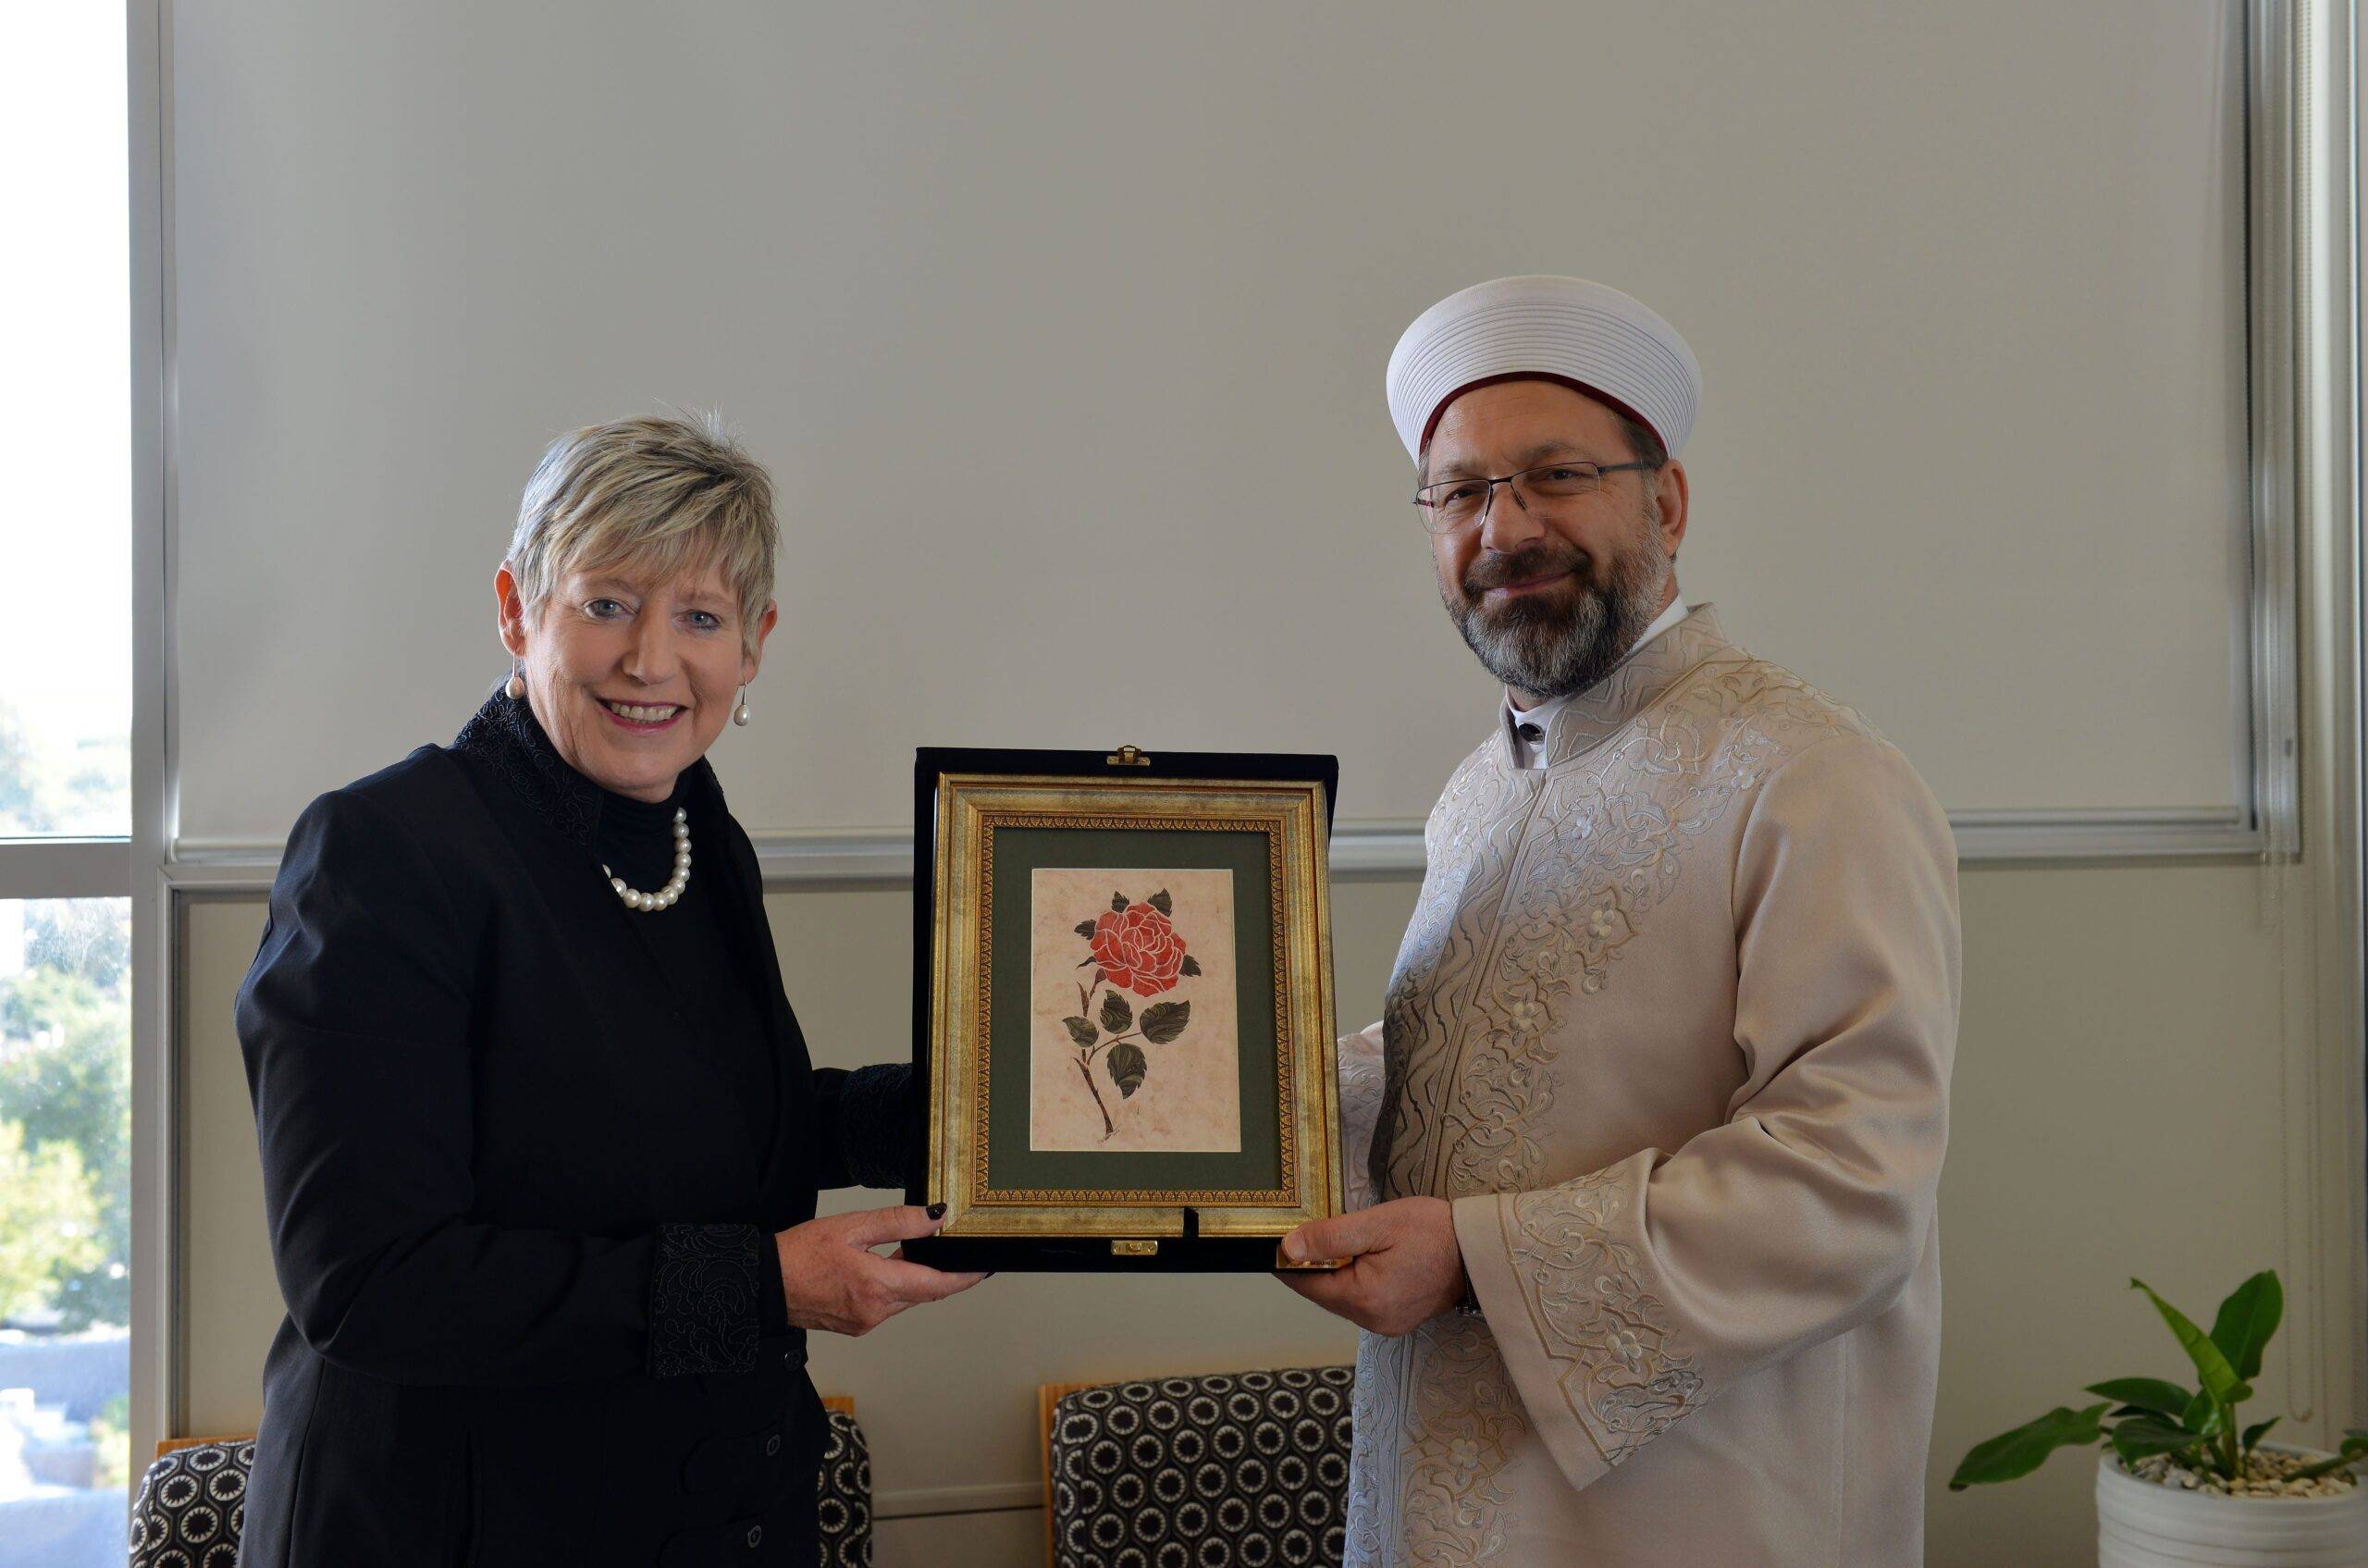 Head of Turkey’s Religious Affairs Directorate Ali Erbas (R) visits Christchurch Metropolitan Mayor Lianne Dalziel (L) to give his condolence for victims of twin terror attacks on Christchurch mosques, on 15 April, 2019 in Christchurch, New Zealand [Recep Şakar/Anadolu Agency]